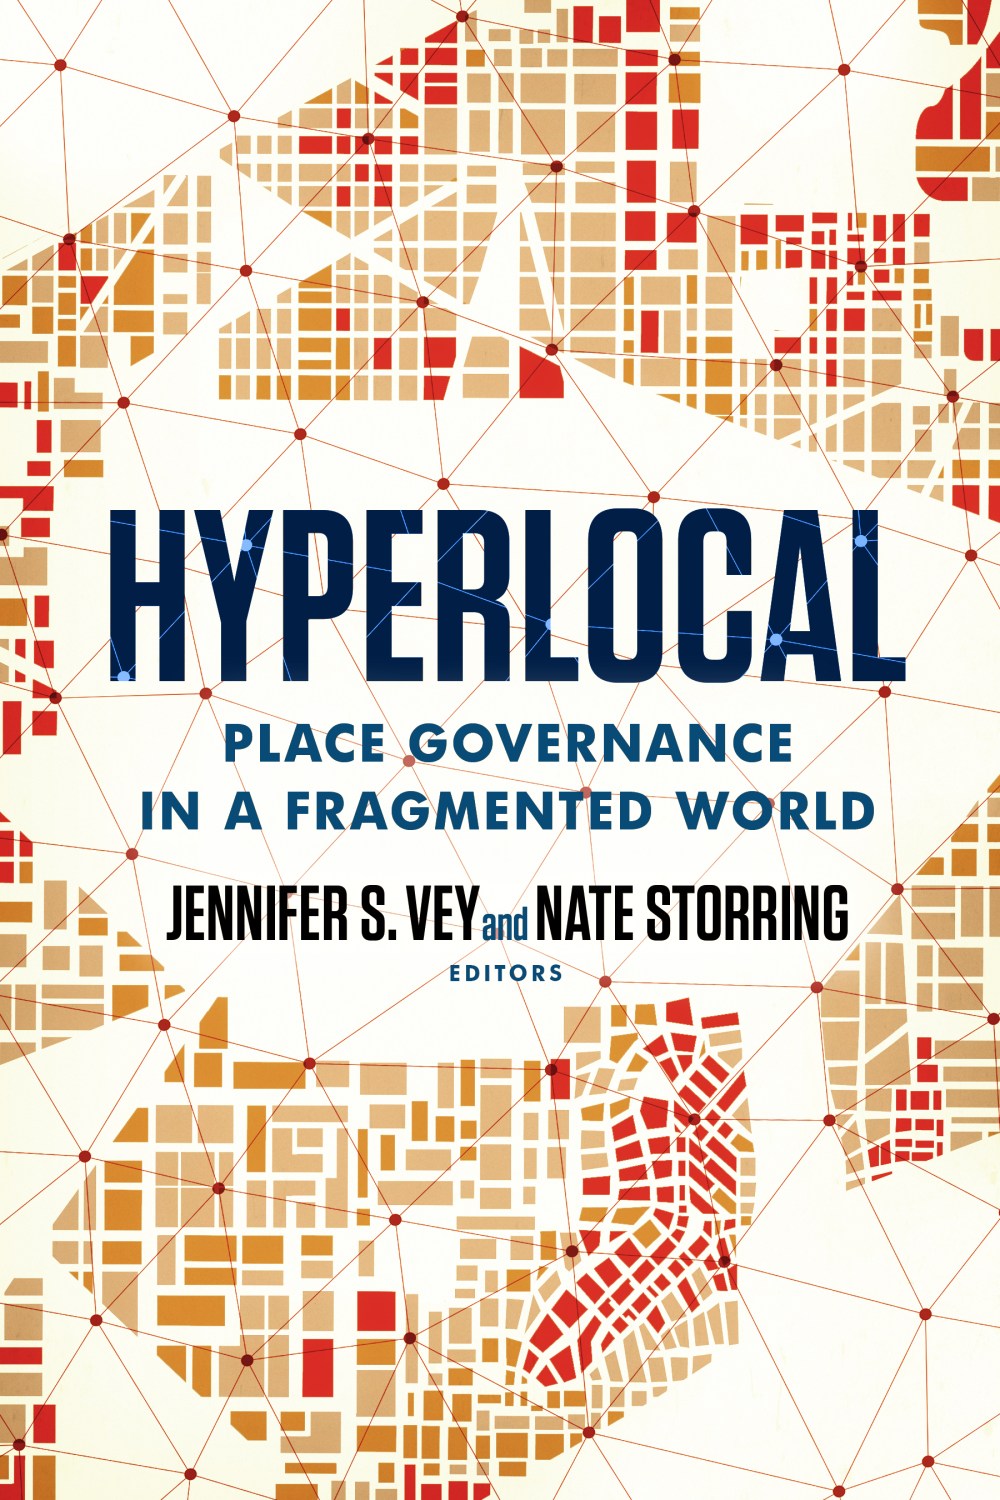 Hyperlocal: Place Governance In a Fragmented World